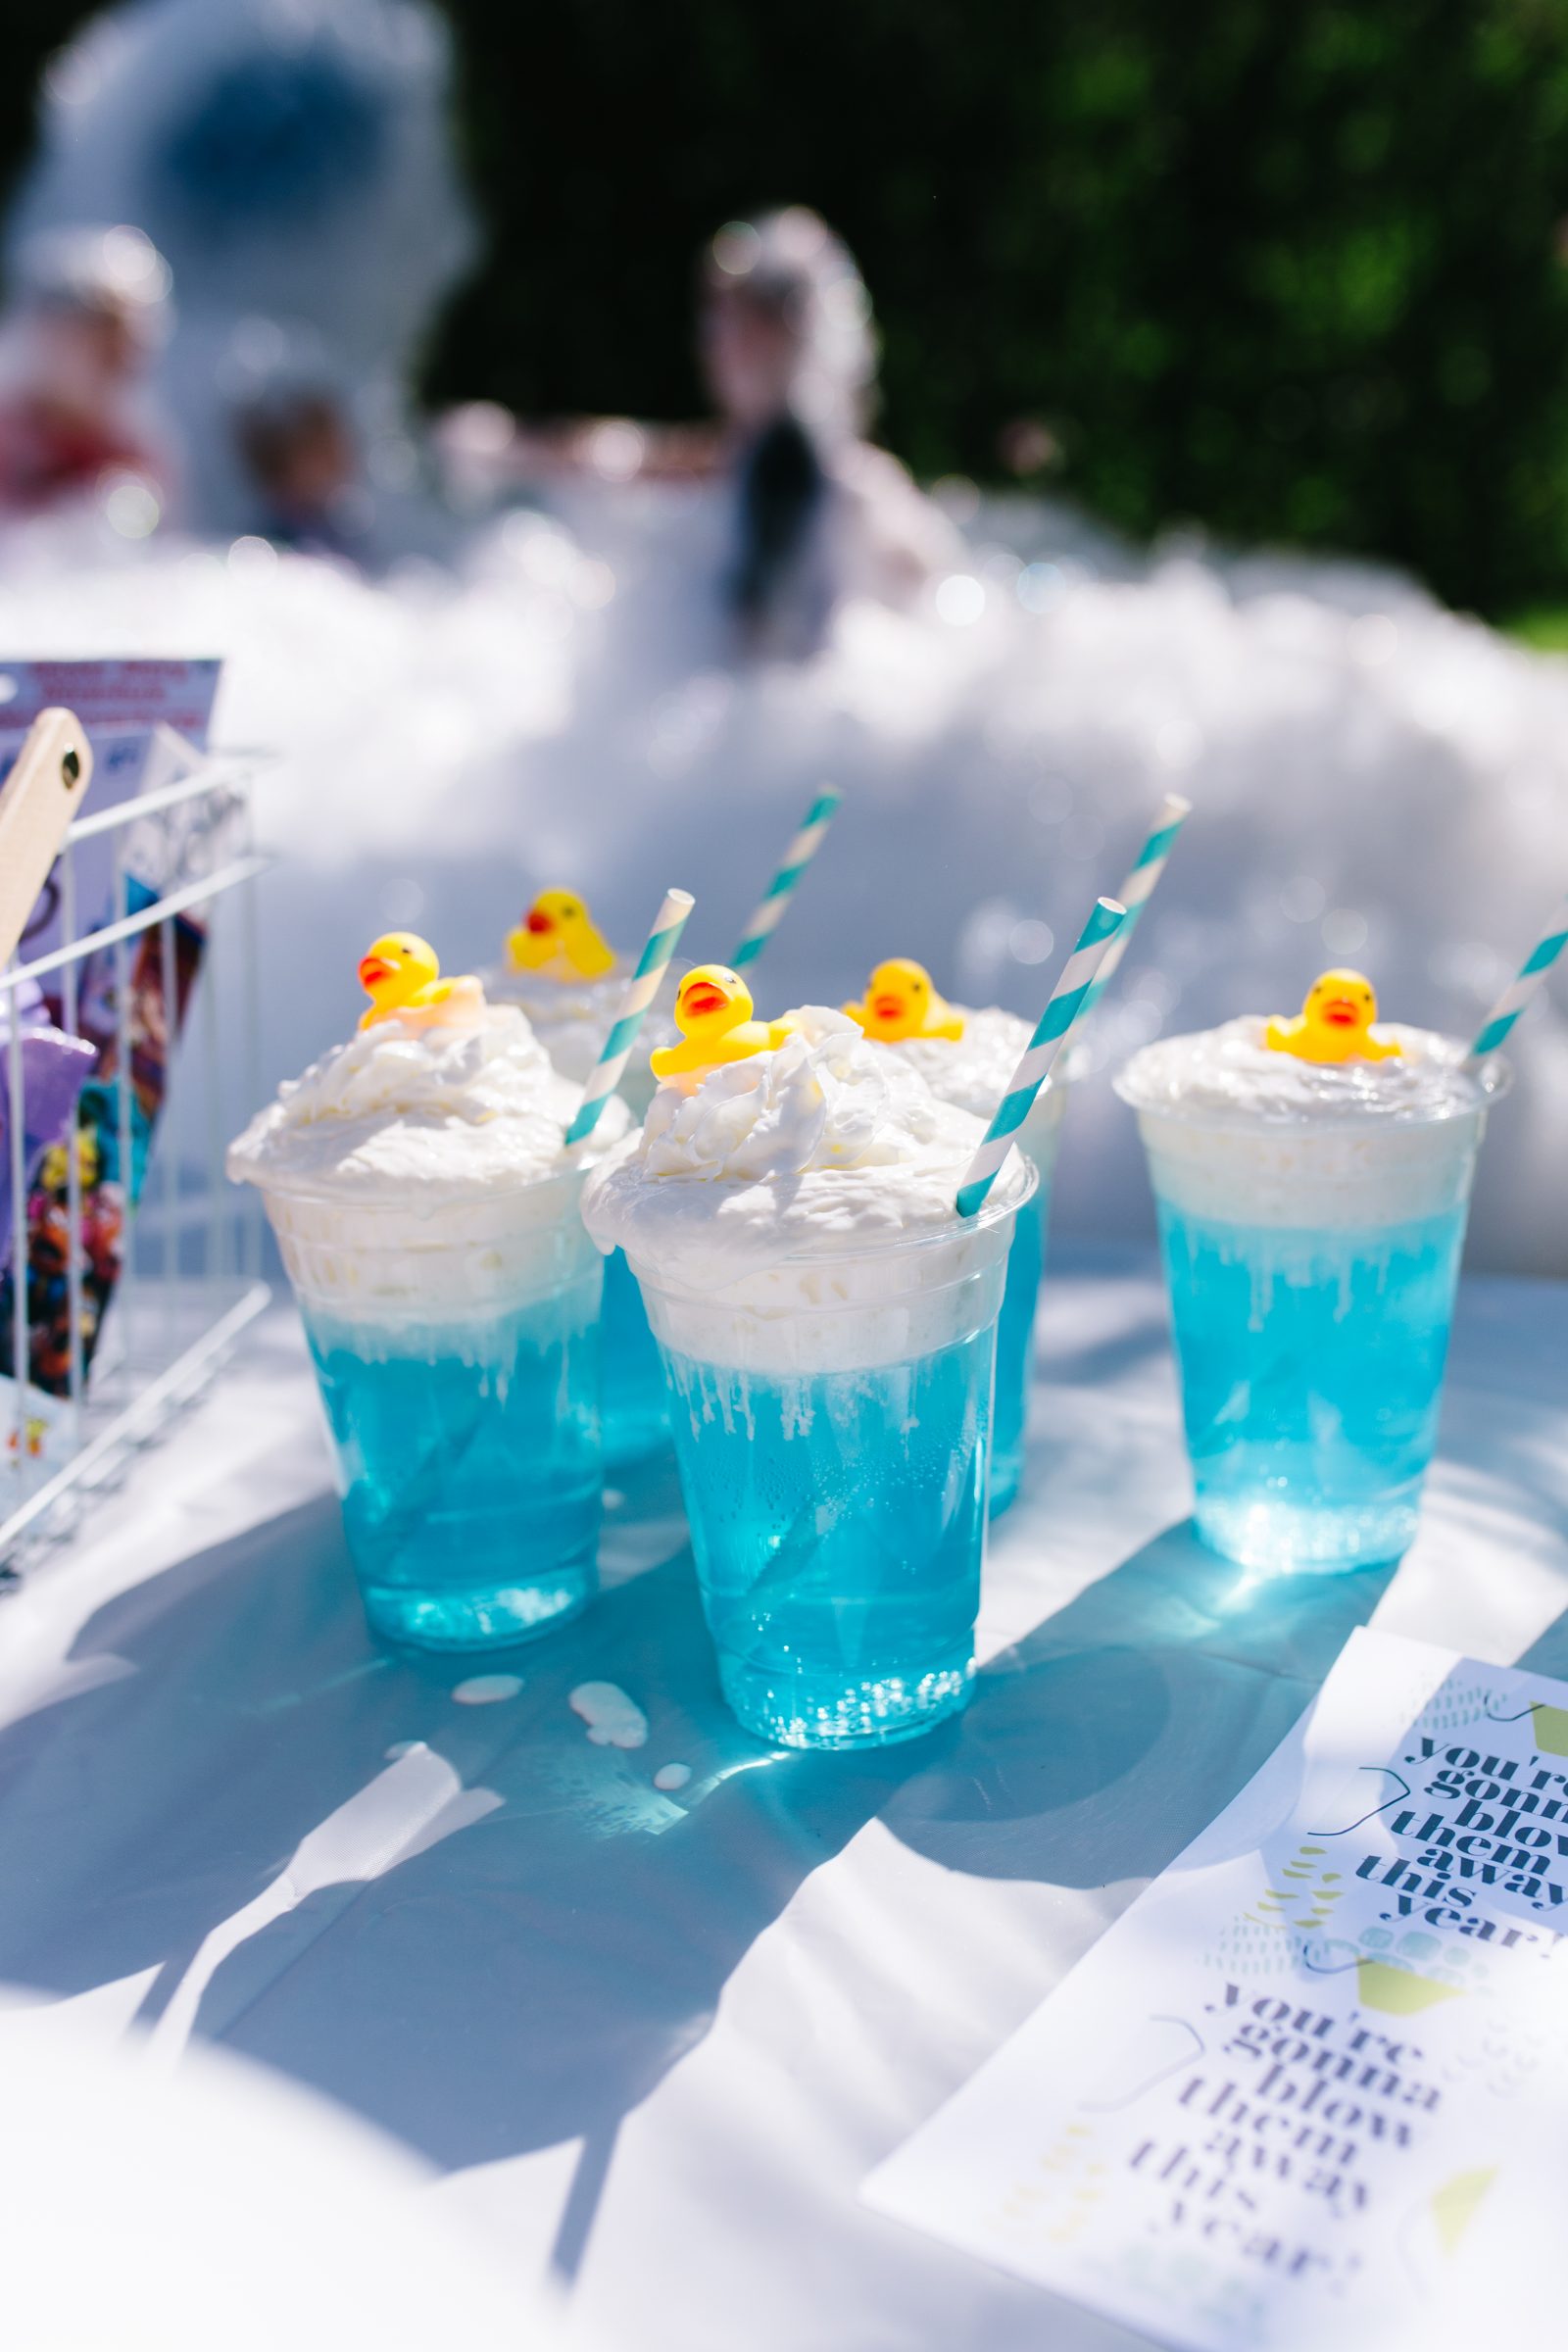 How to Throw a Bubbly Back to School Party!e + a tutorial featured by Top US Craft Blog + The Pretty Life Girls